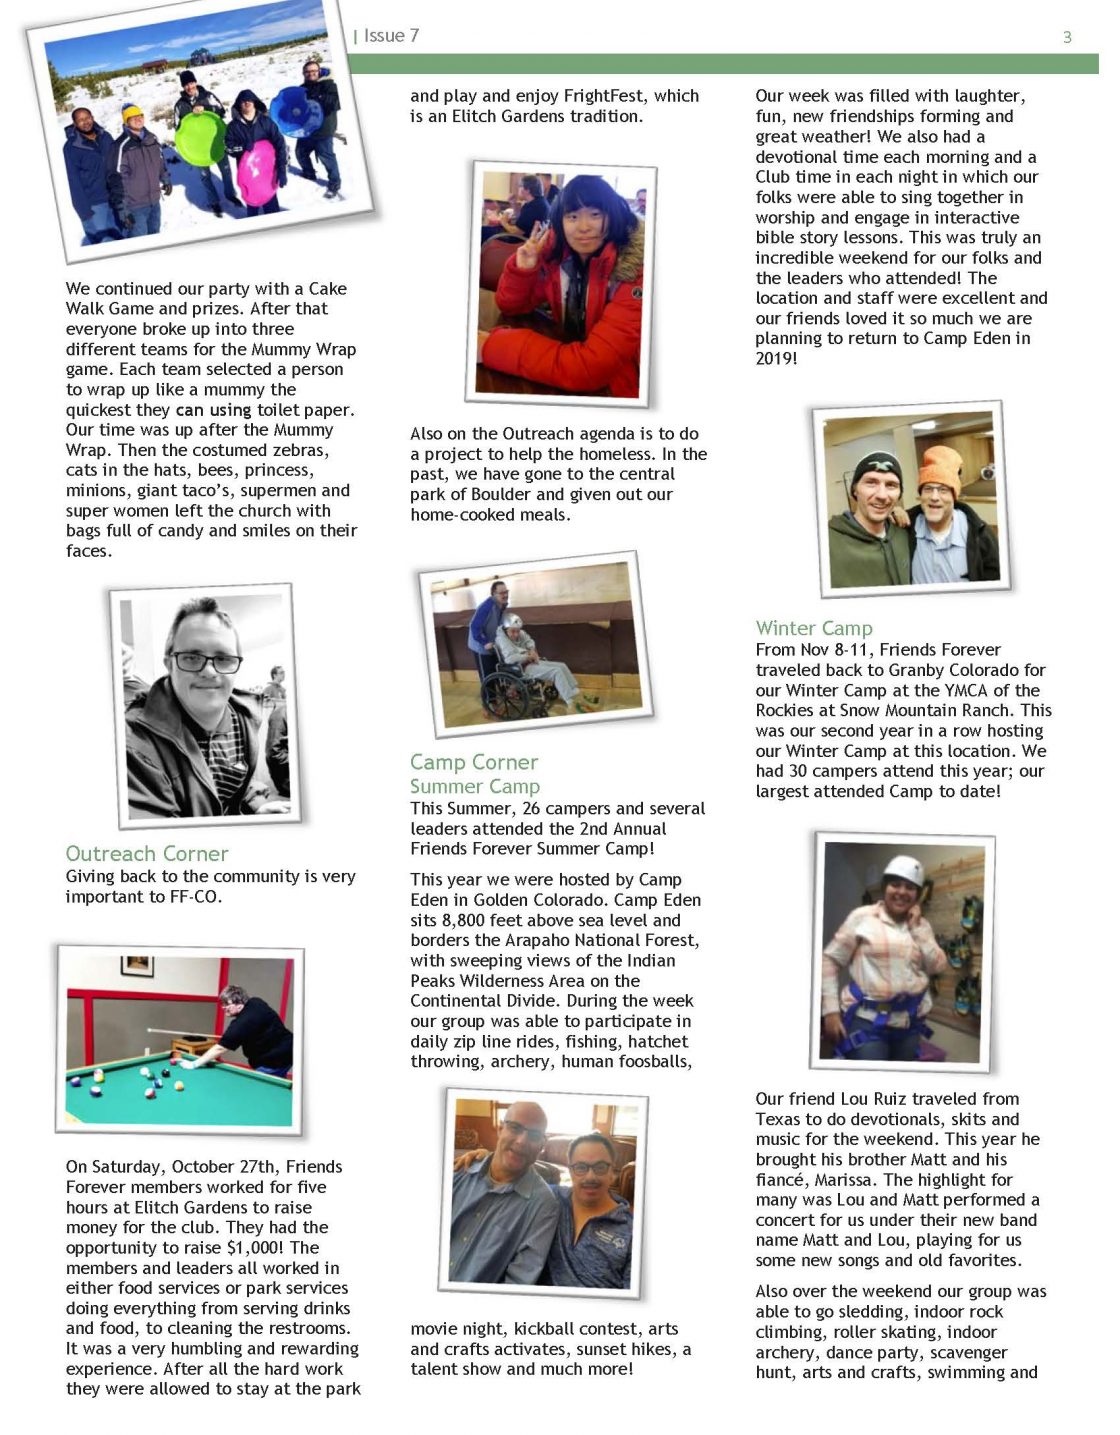 Newsletter Issue 7 - page 3